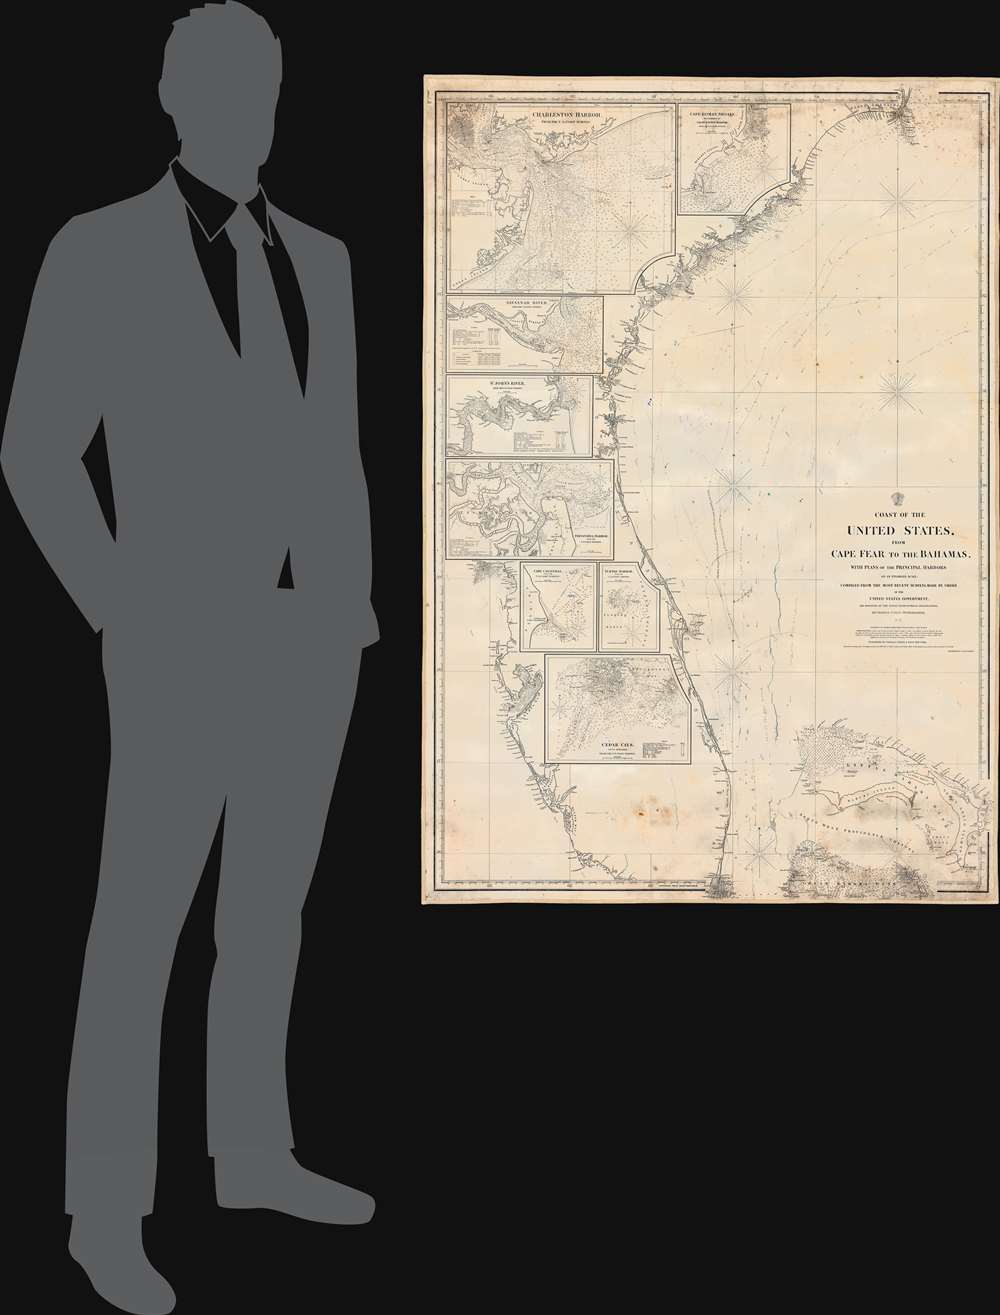 Coast of the United States from Cape Fear to the Bahamas, with plans of the Principal Harbors on an Enlarged Scale; Compiled from the most Recent Surveys, Made by order of the United States Government, and Adjusted by the Latest Astronomical Observations. - Alternate View 1